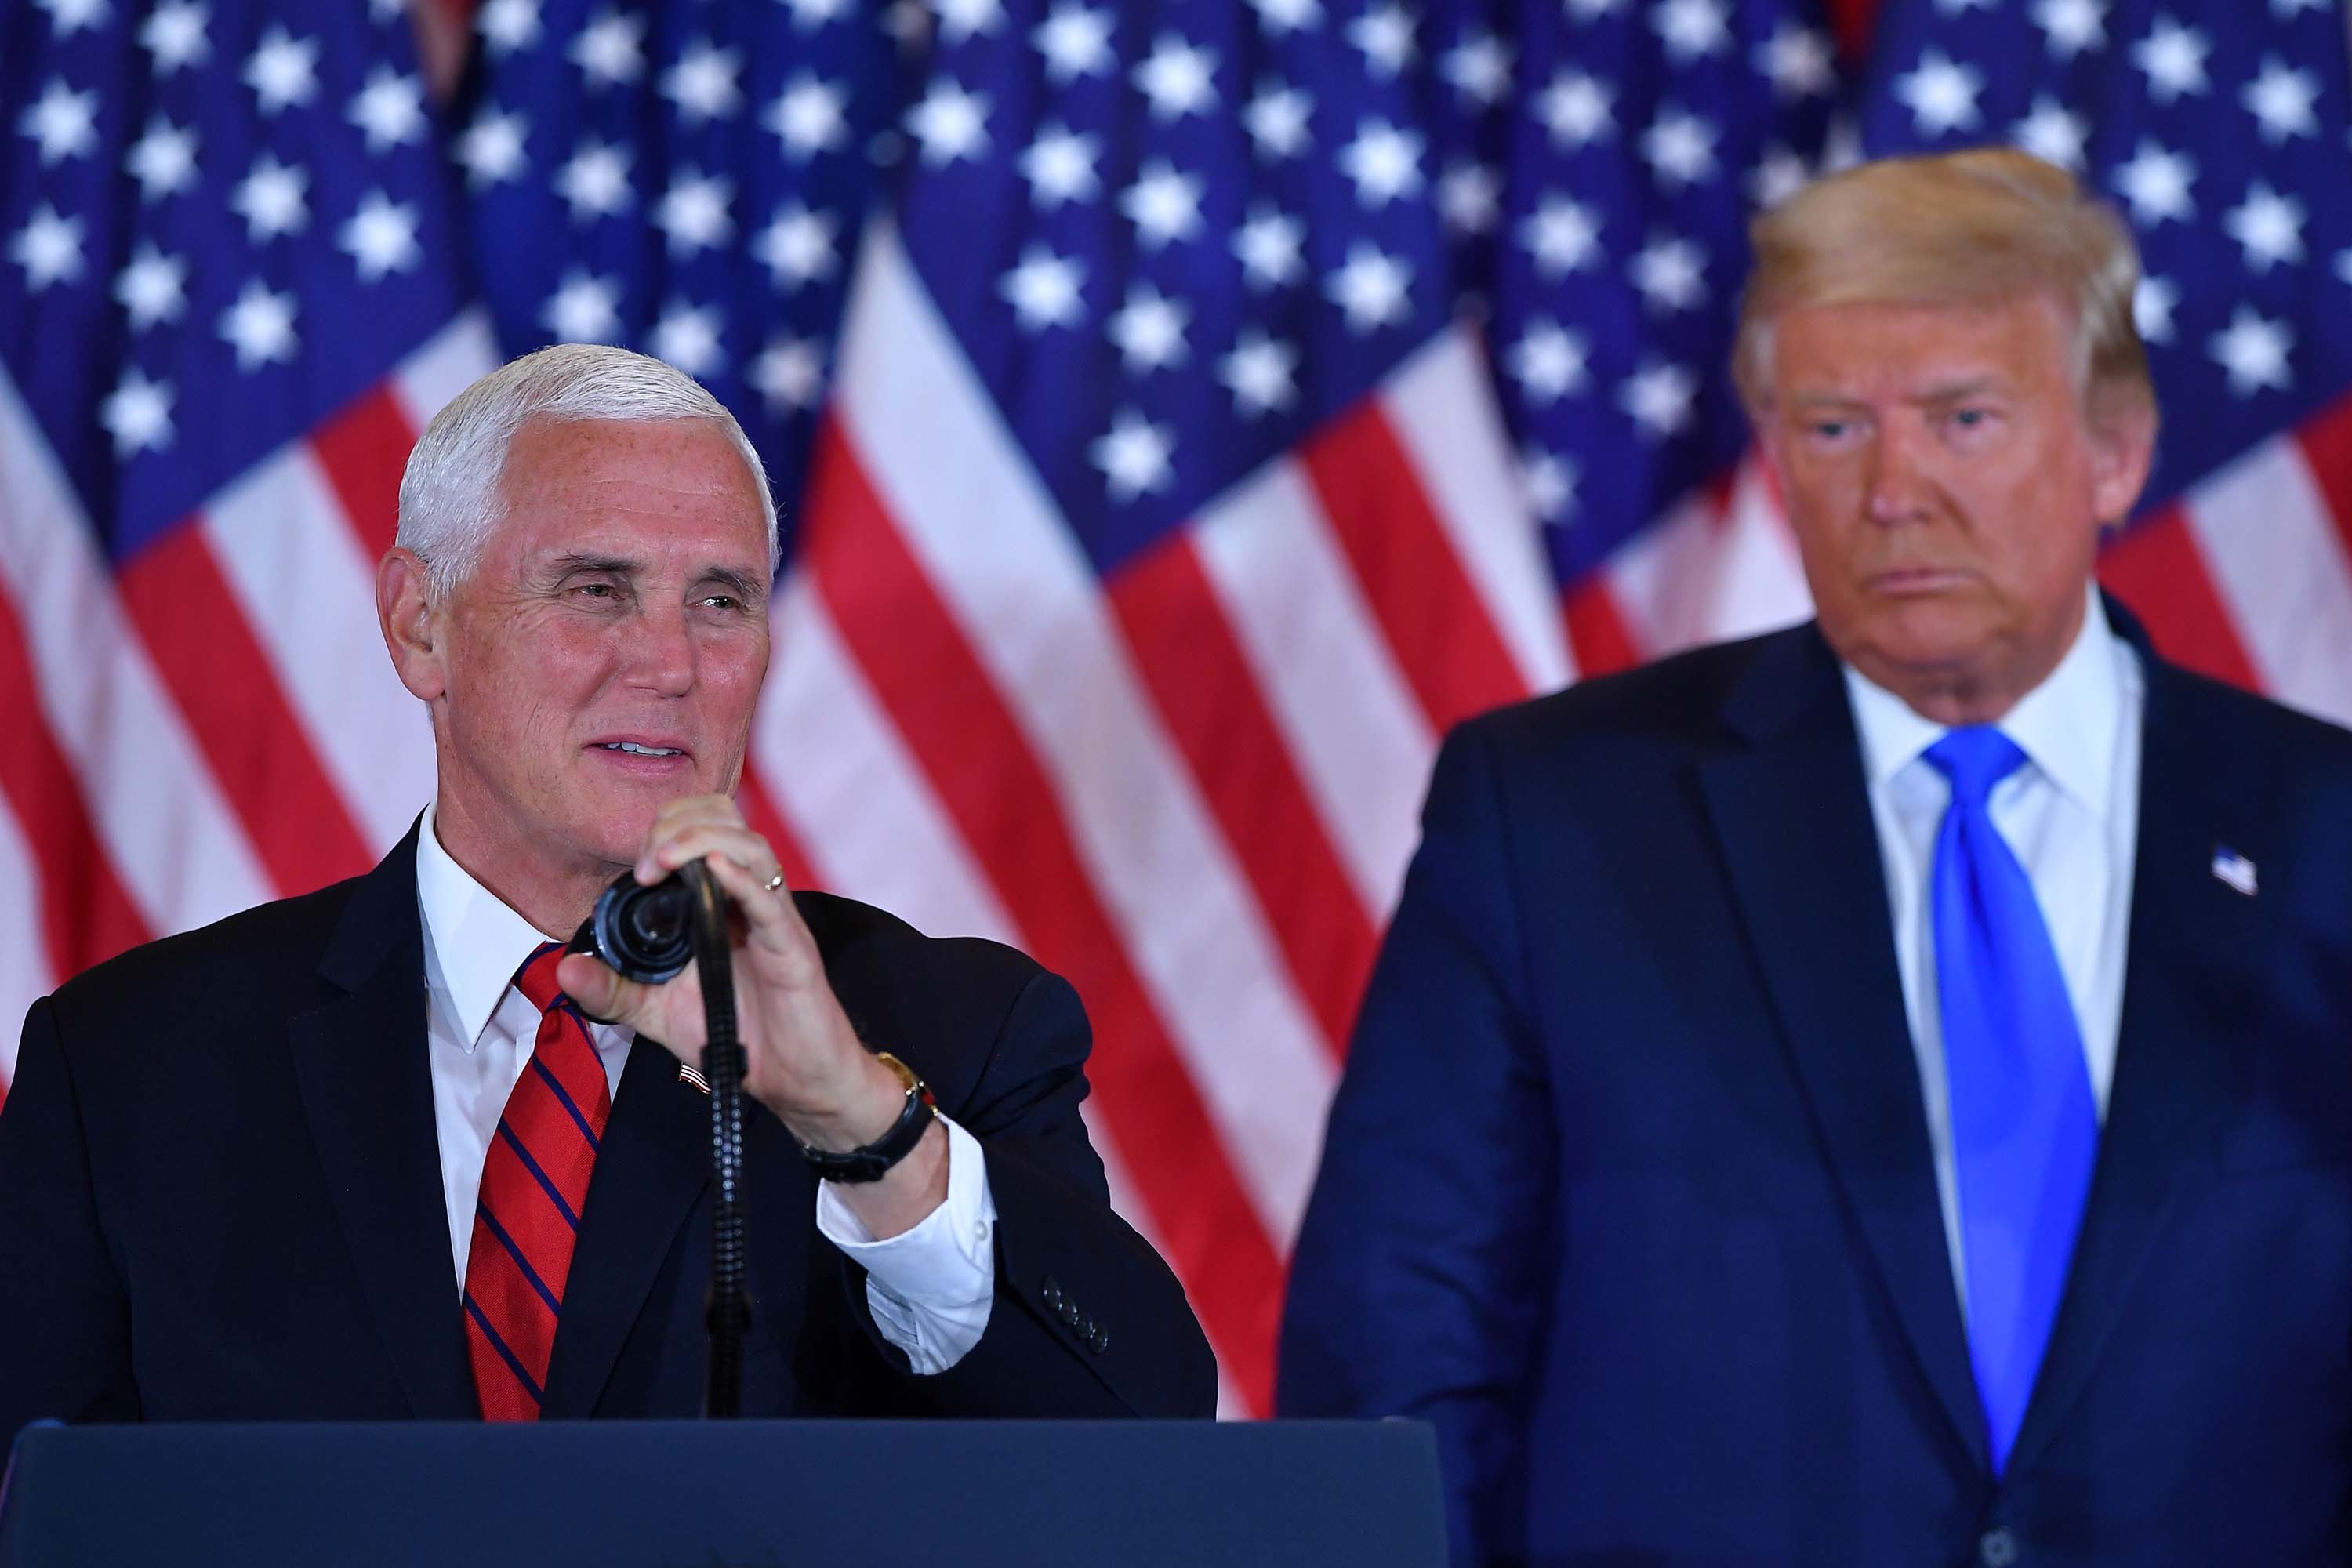 Vice President Mike Pence speaks alongside President Donald Trump in the East Room of the White House in Washington, DC, early on November 4.